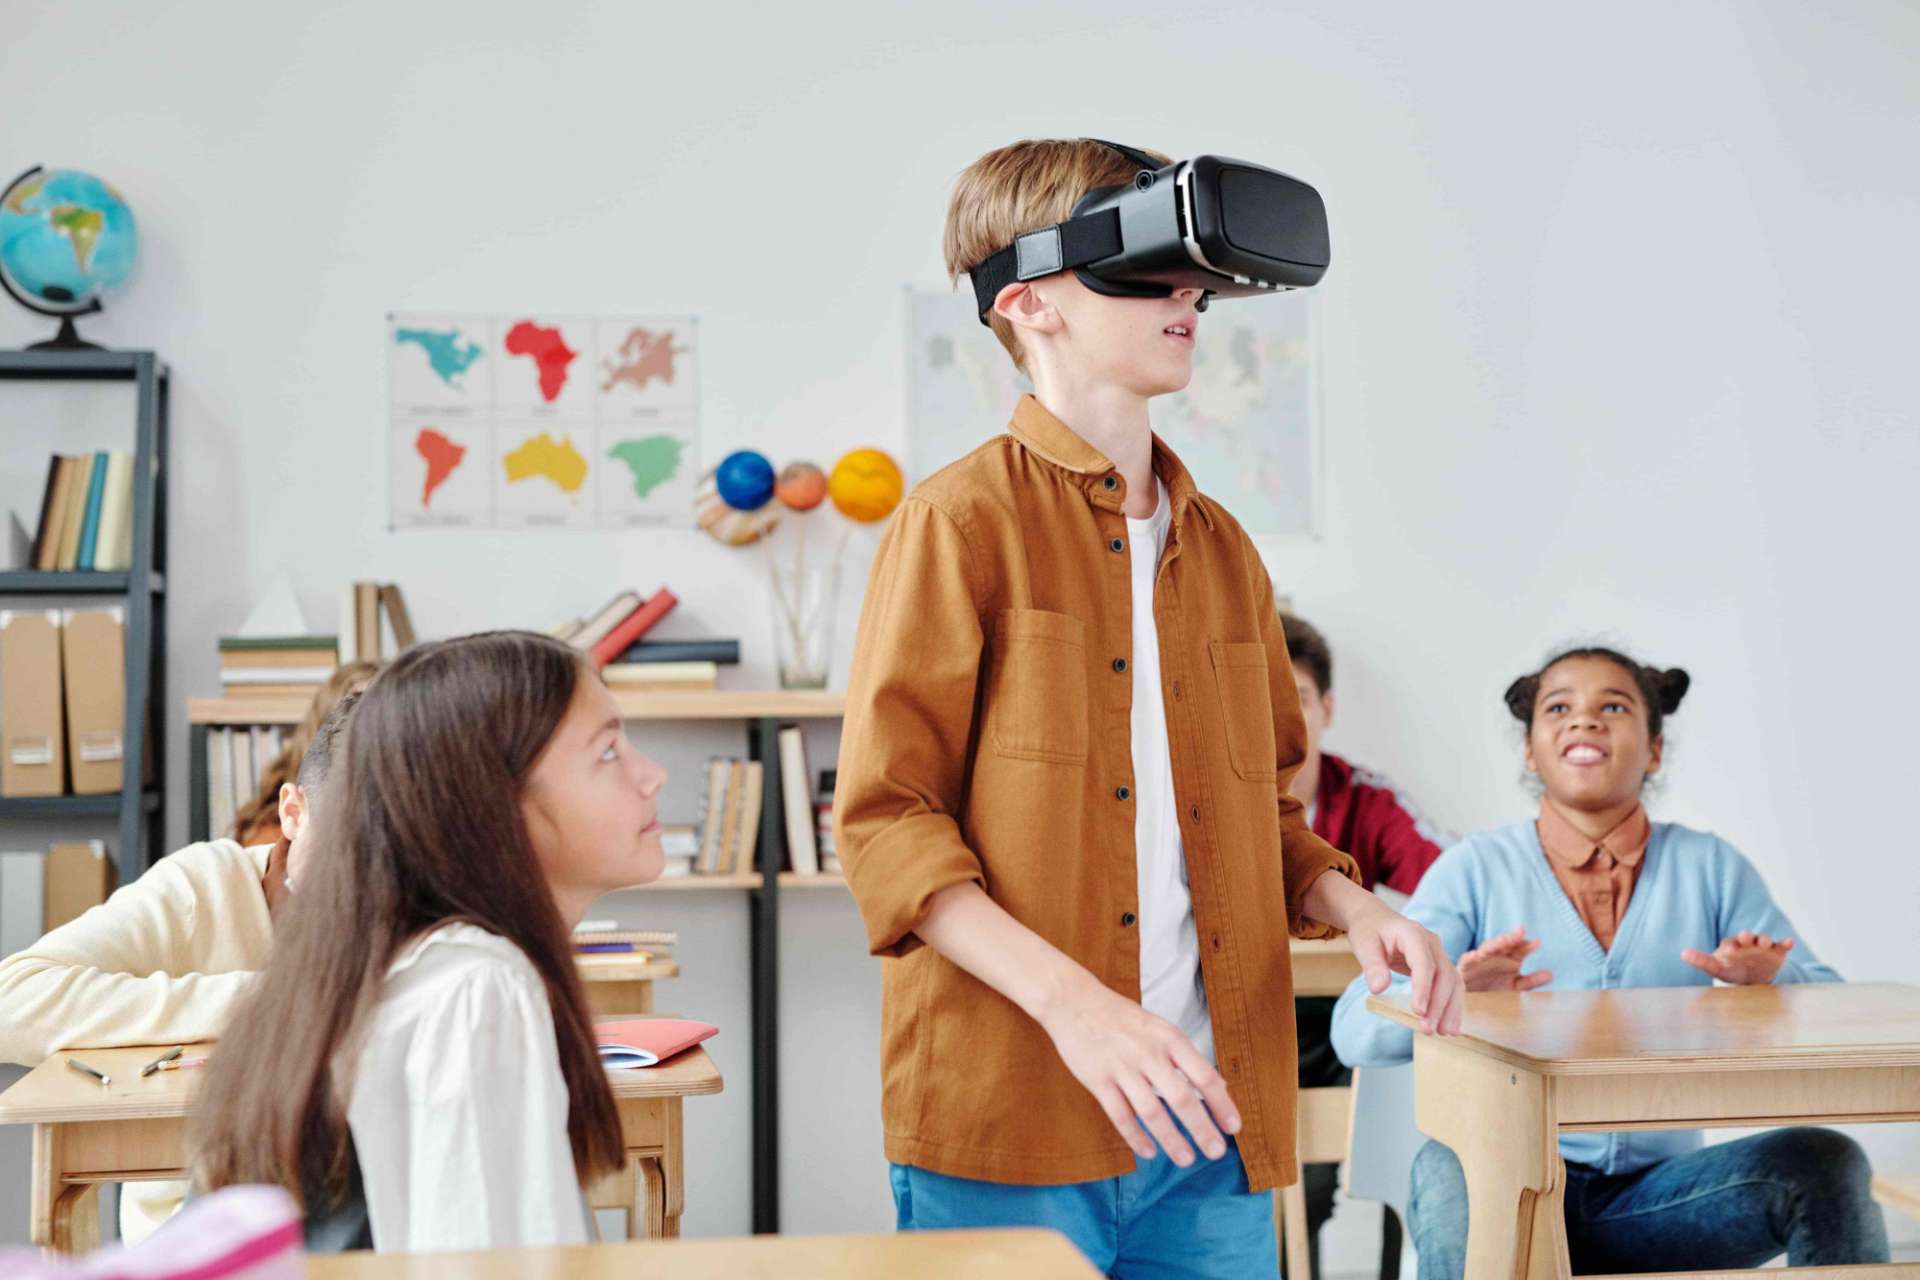 Vr and ar in class